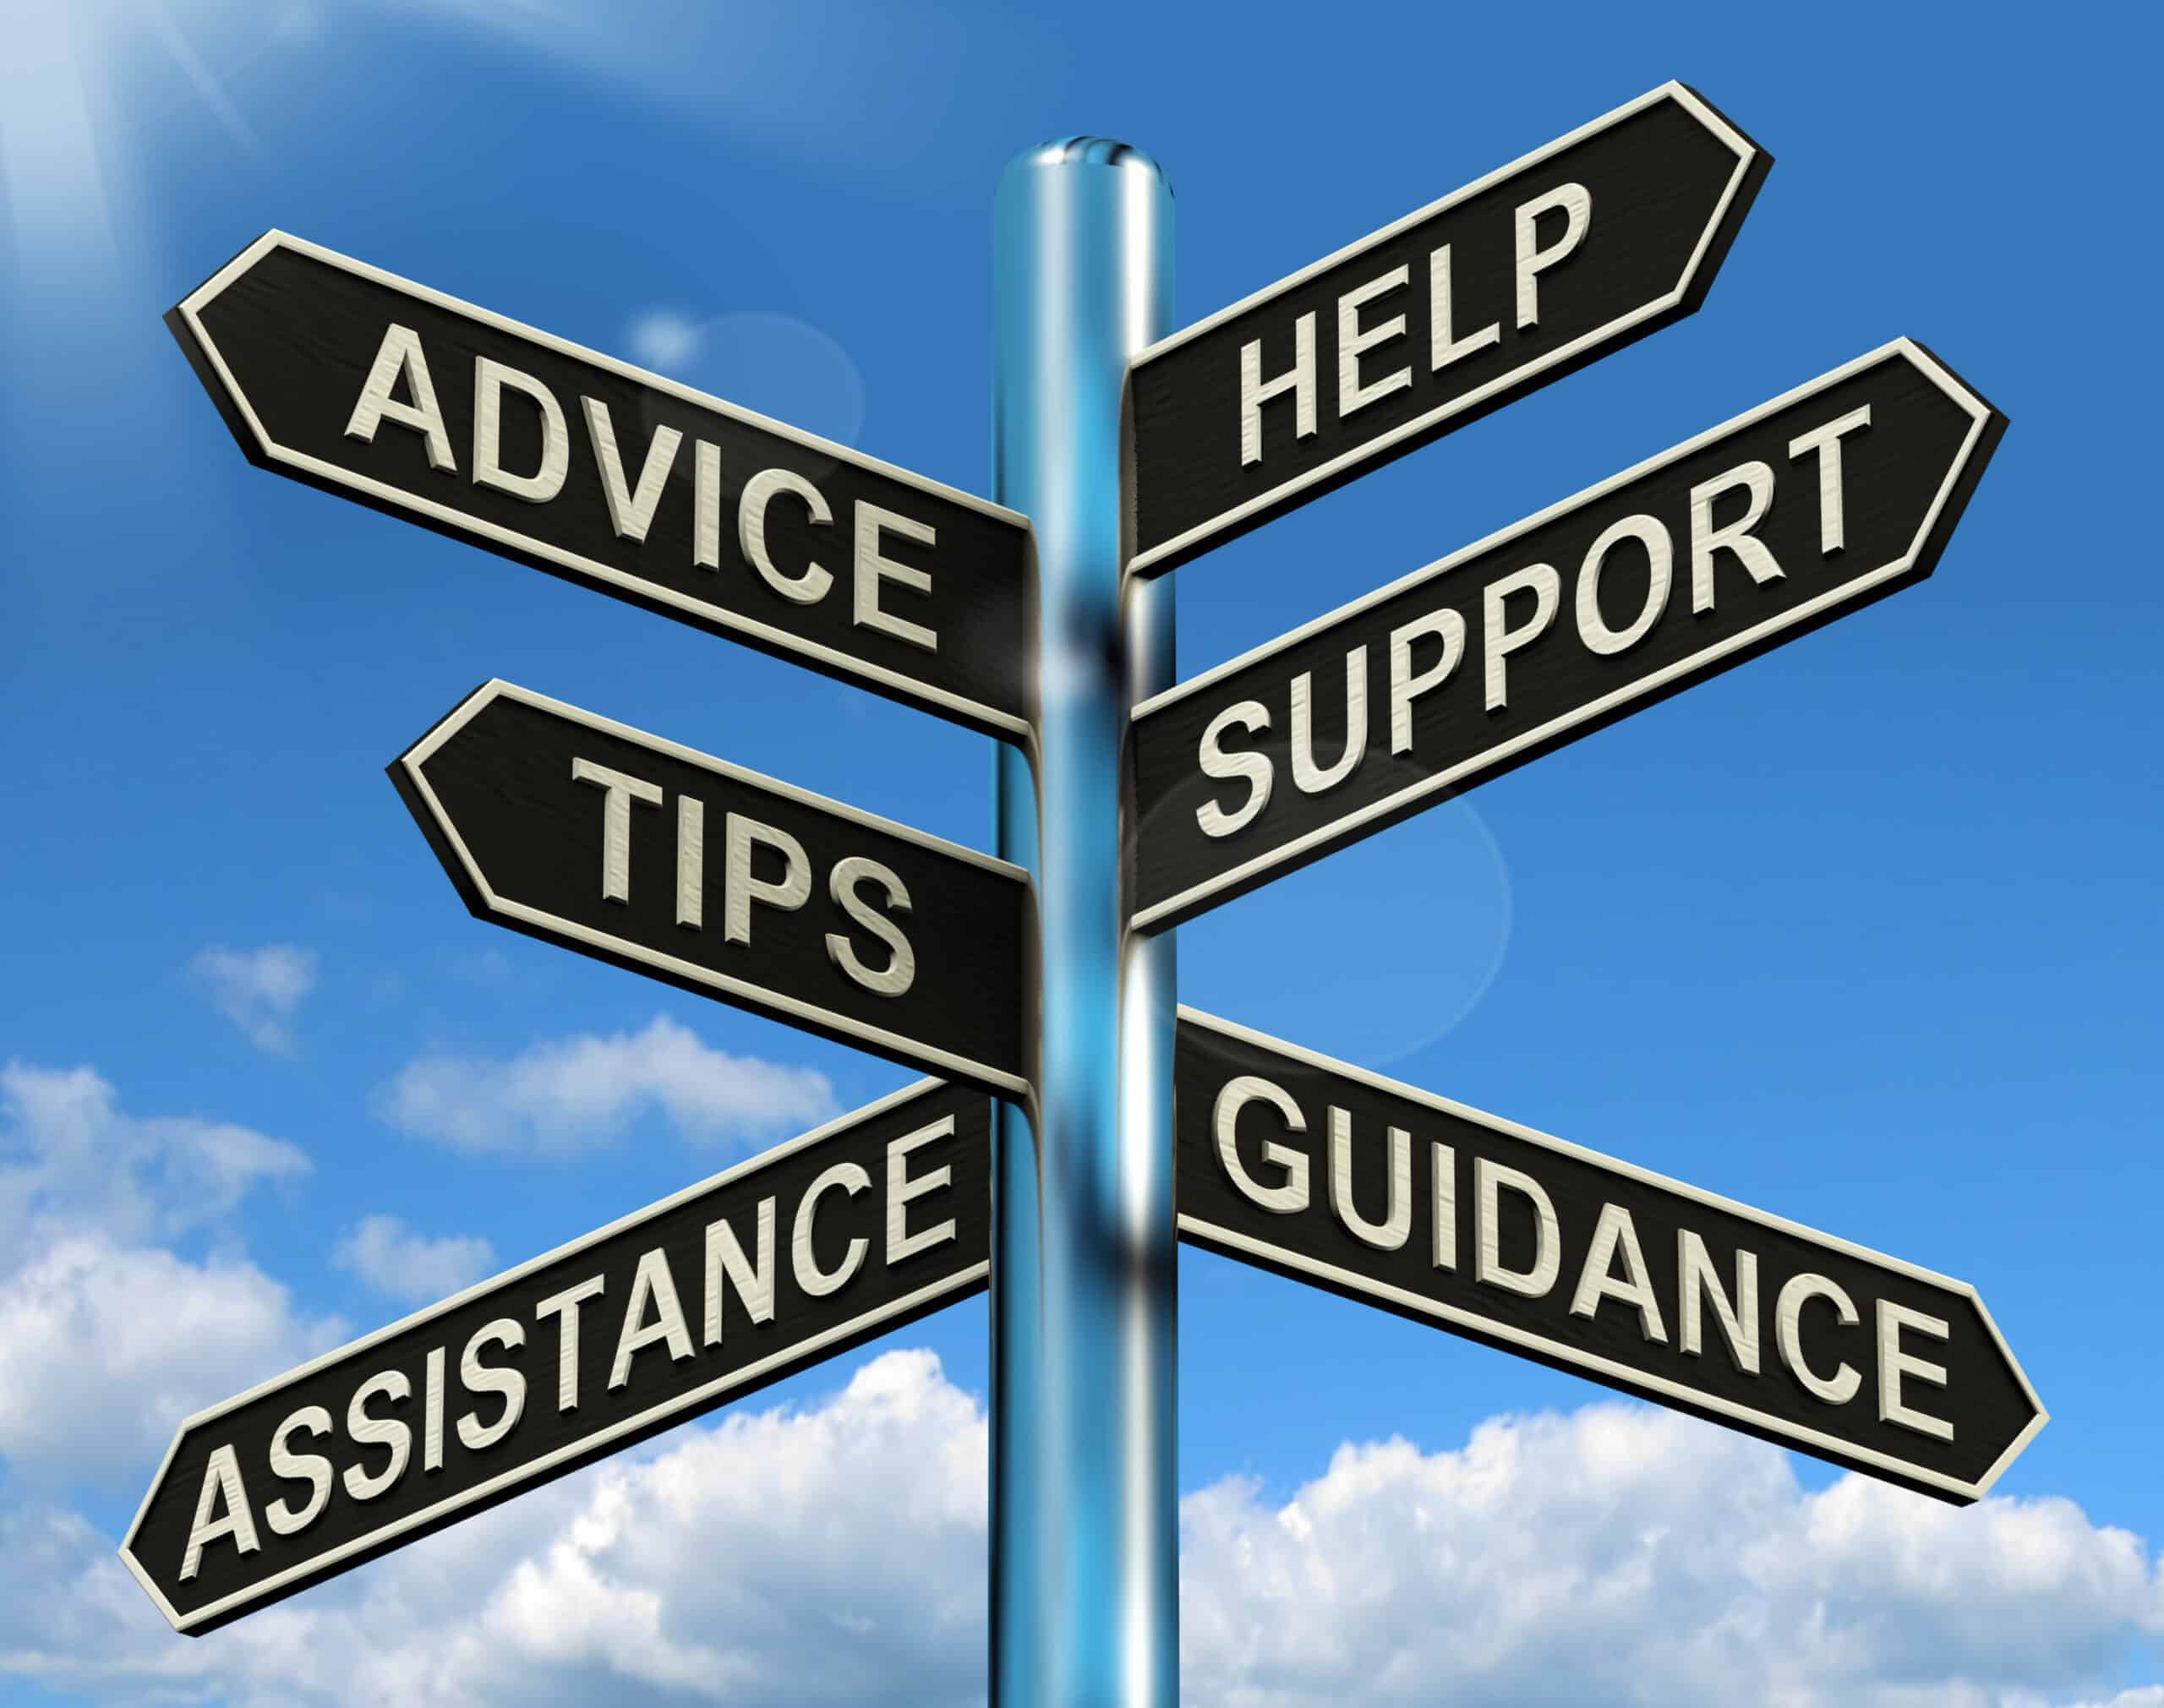 Advice Help Support And Tips Signpost Shows Information And Guidance